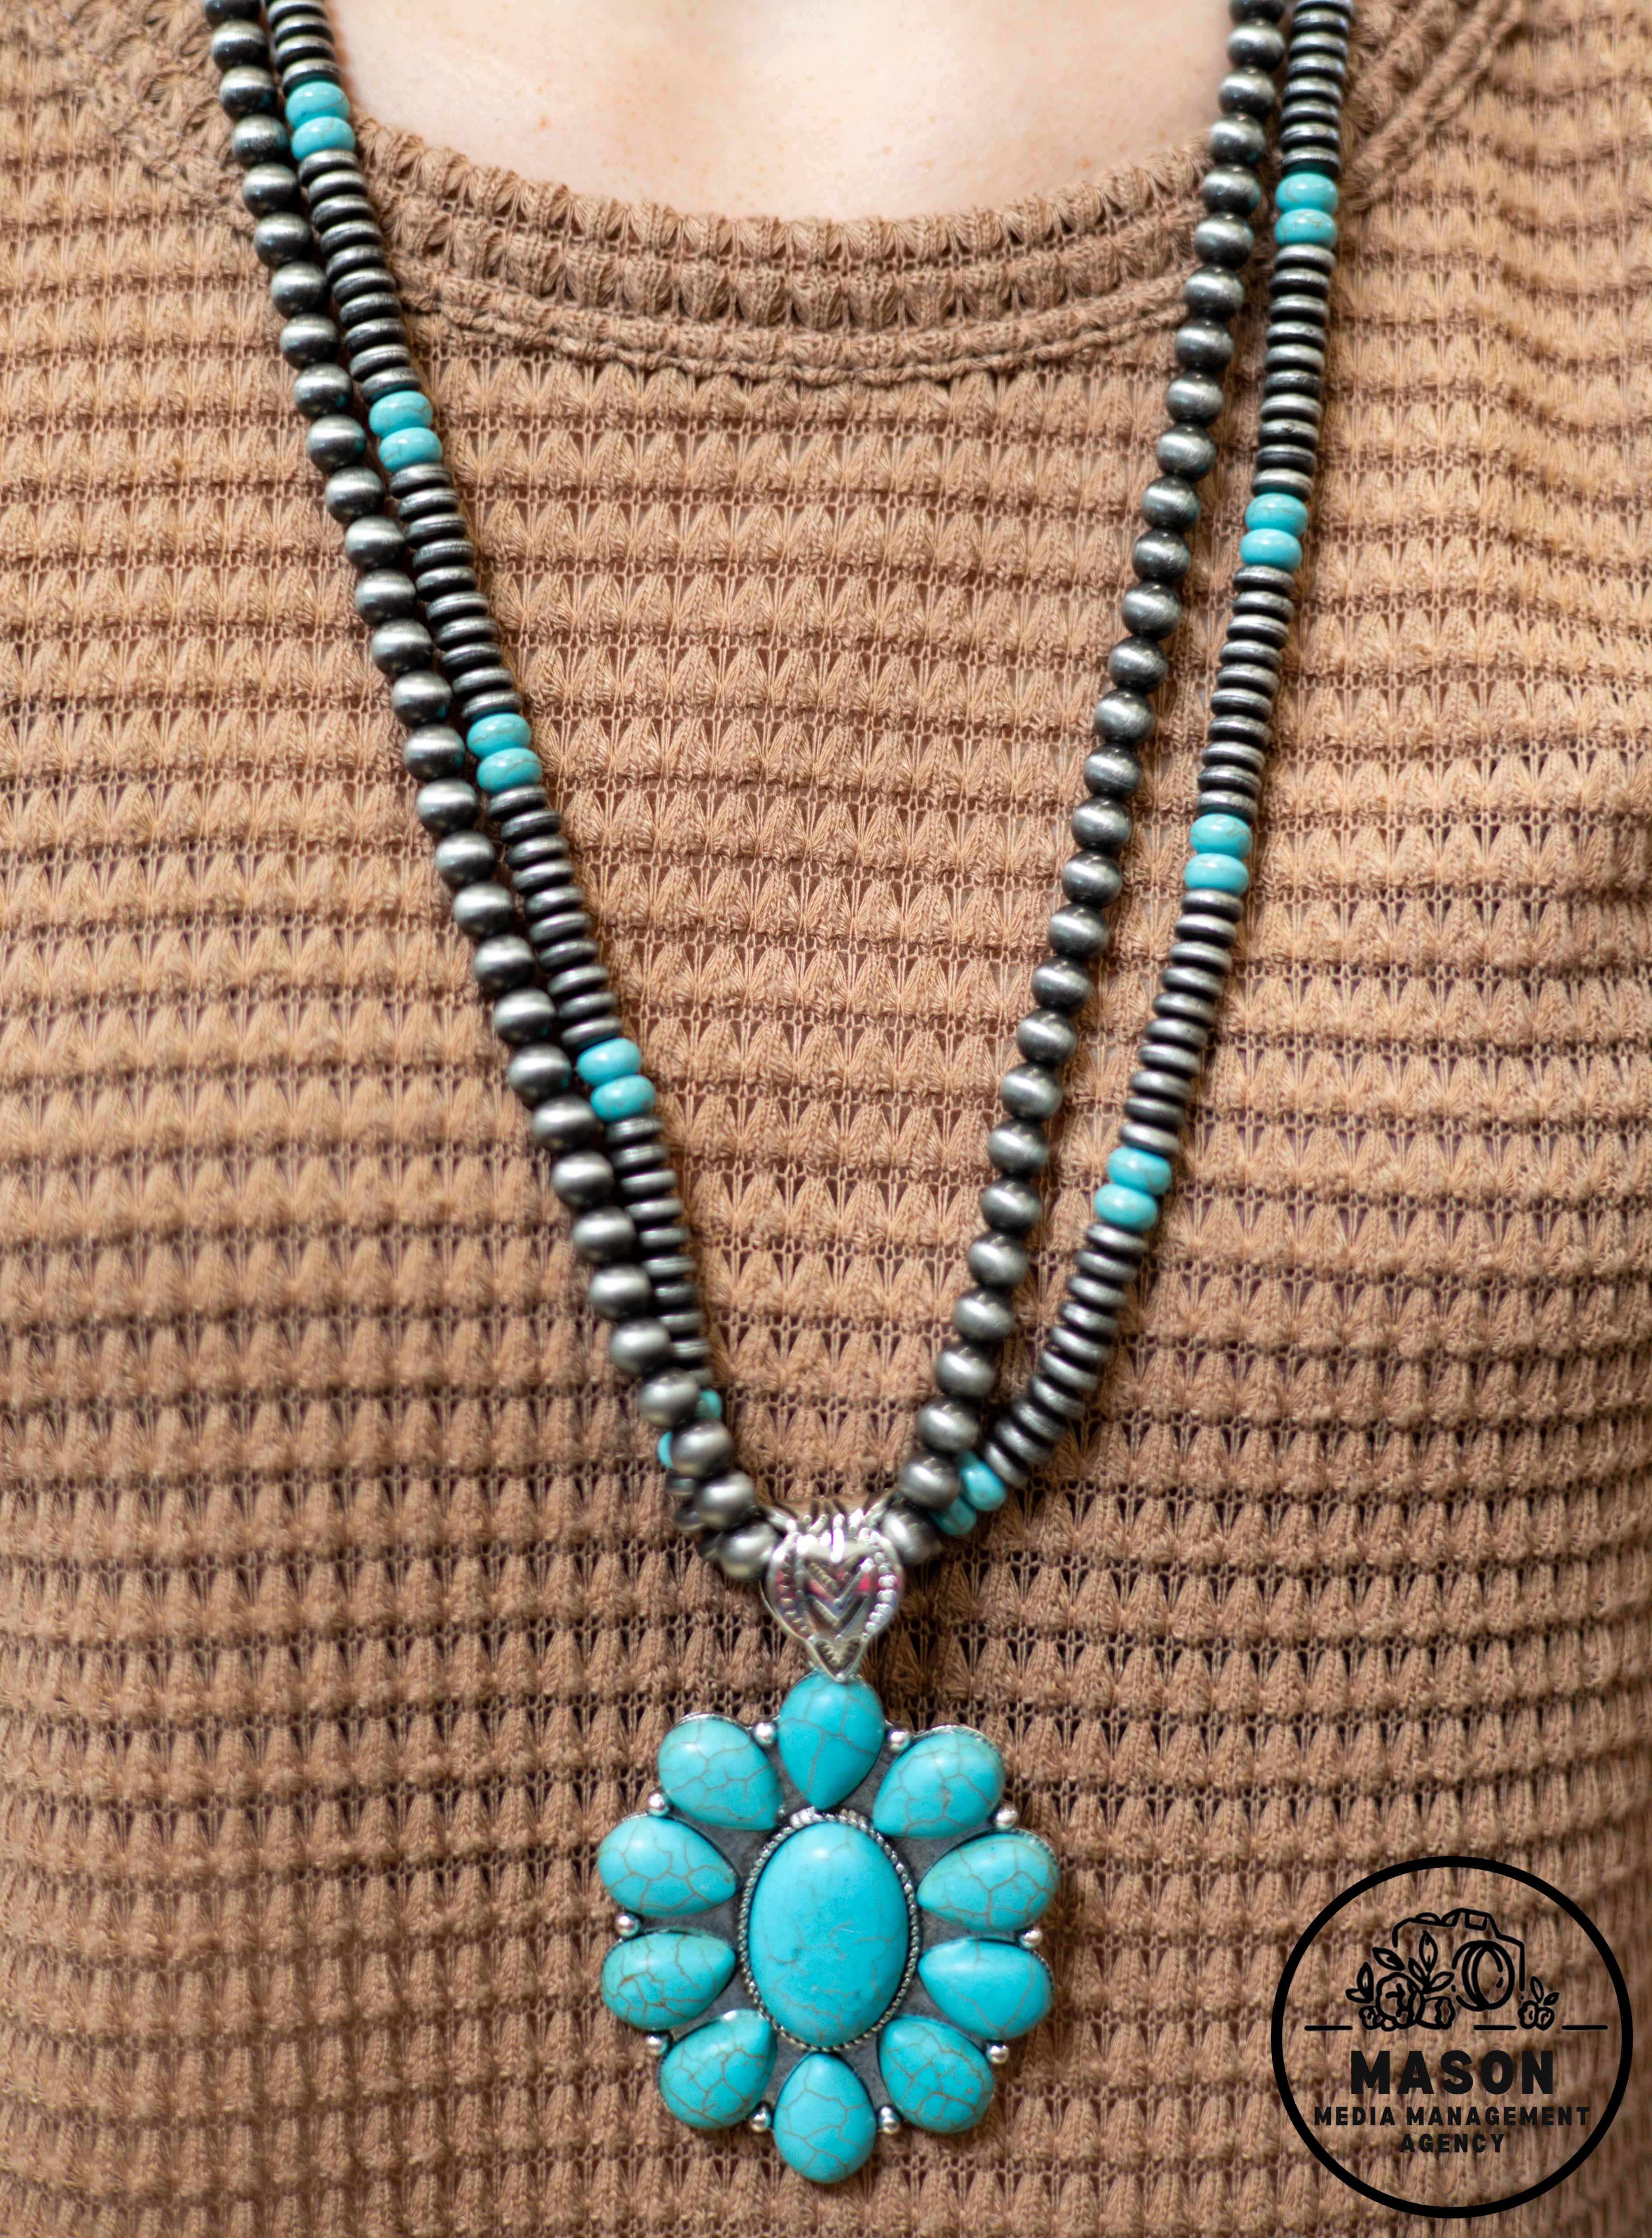 Ranch Wifey Turquoise Squash Blossom Necklace